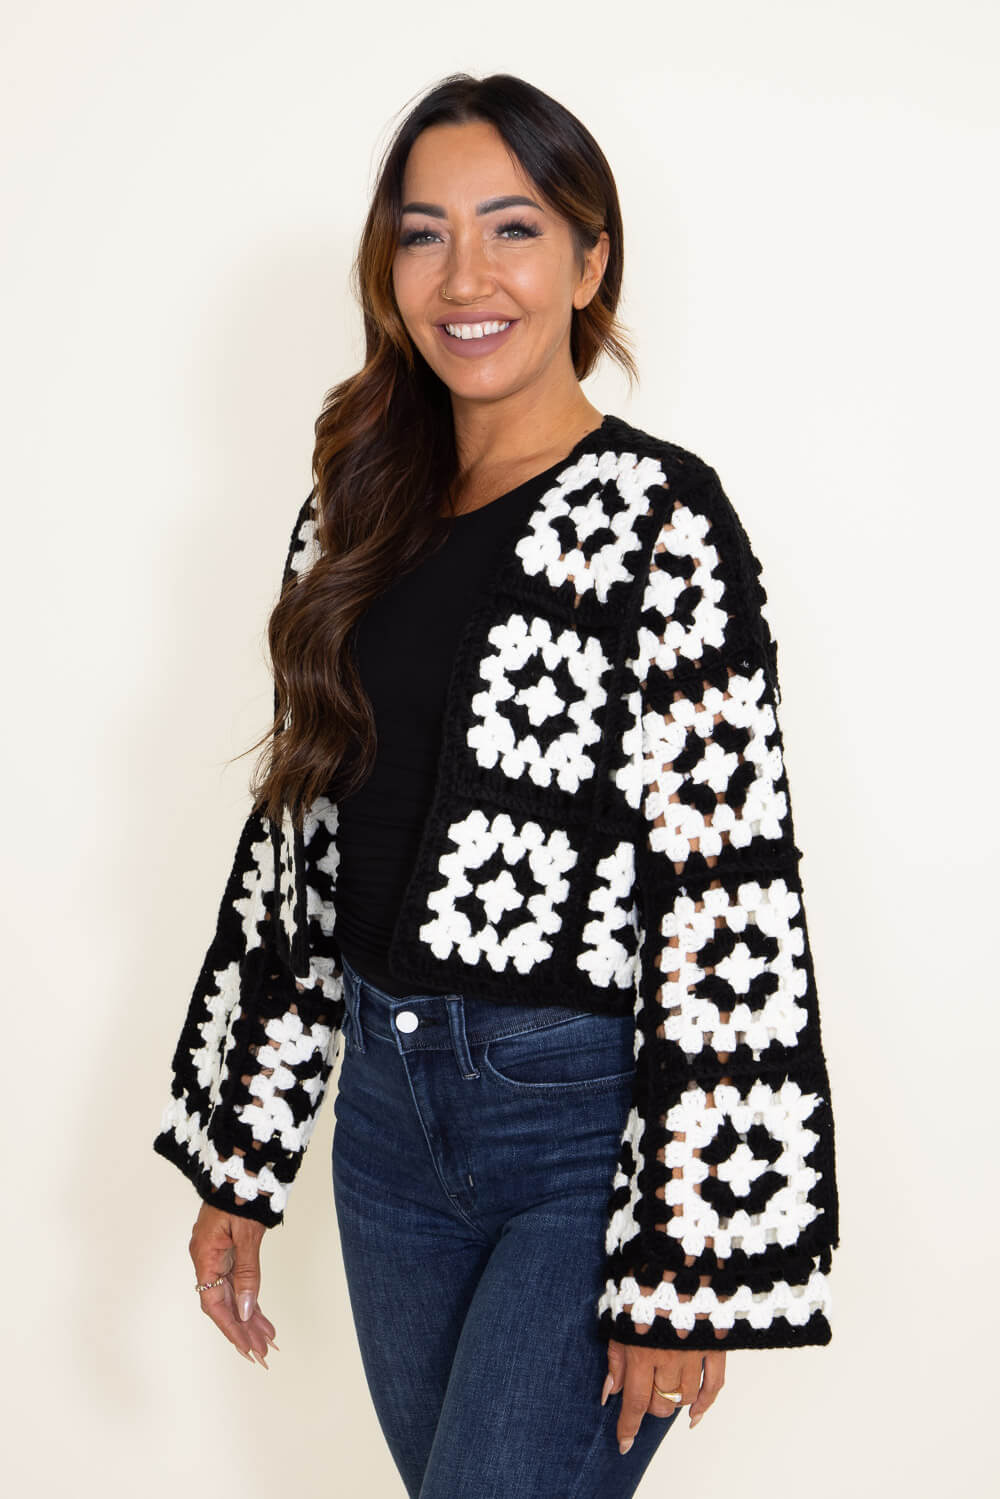 Granny Square Crochet Cropped Cardigan for Women in Black/White